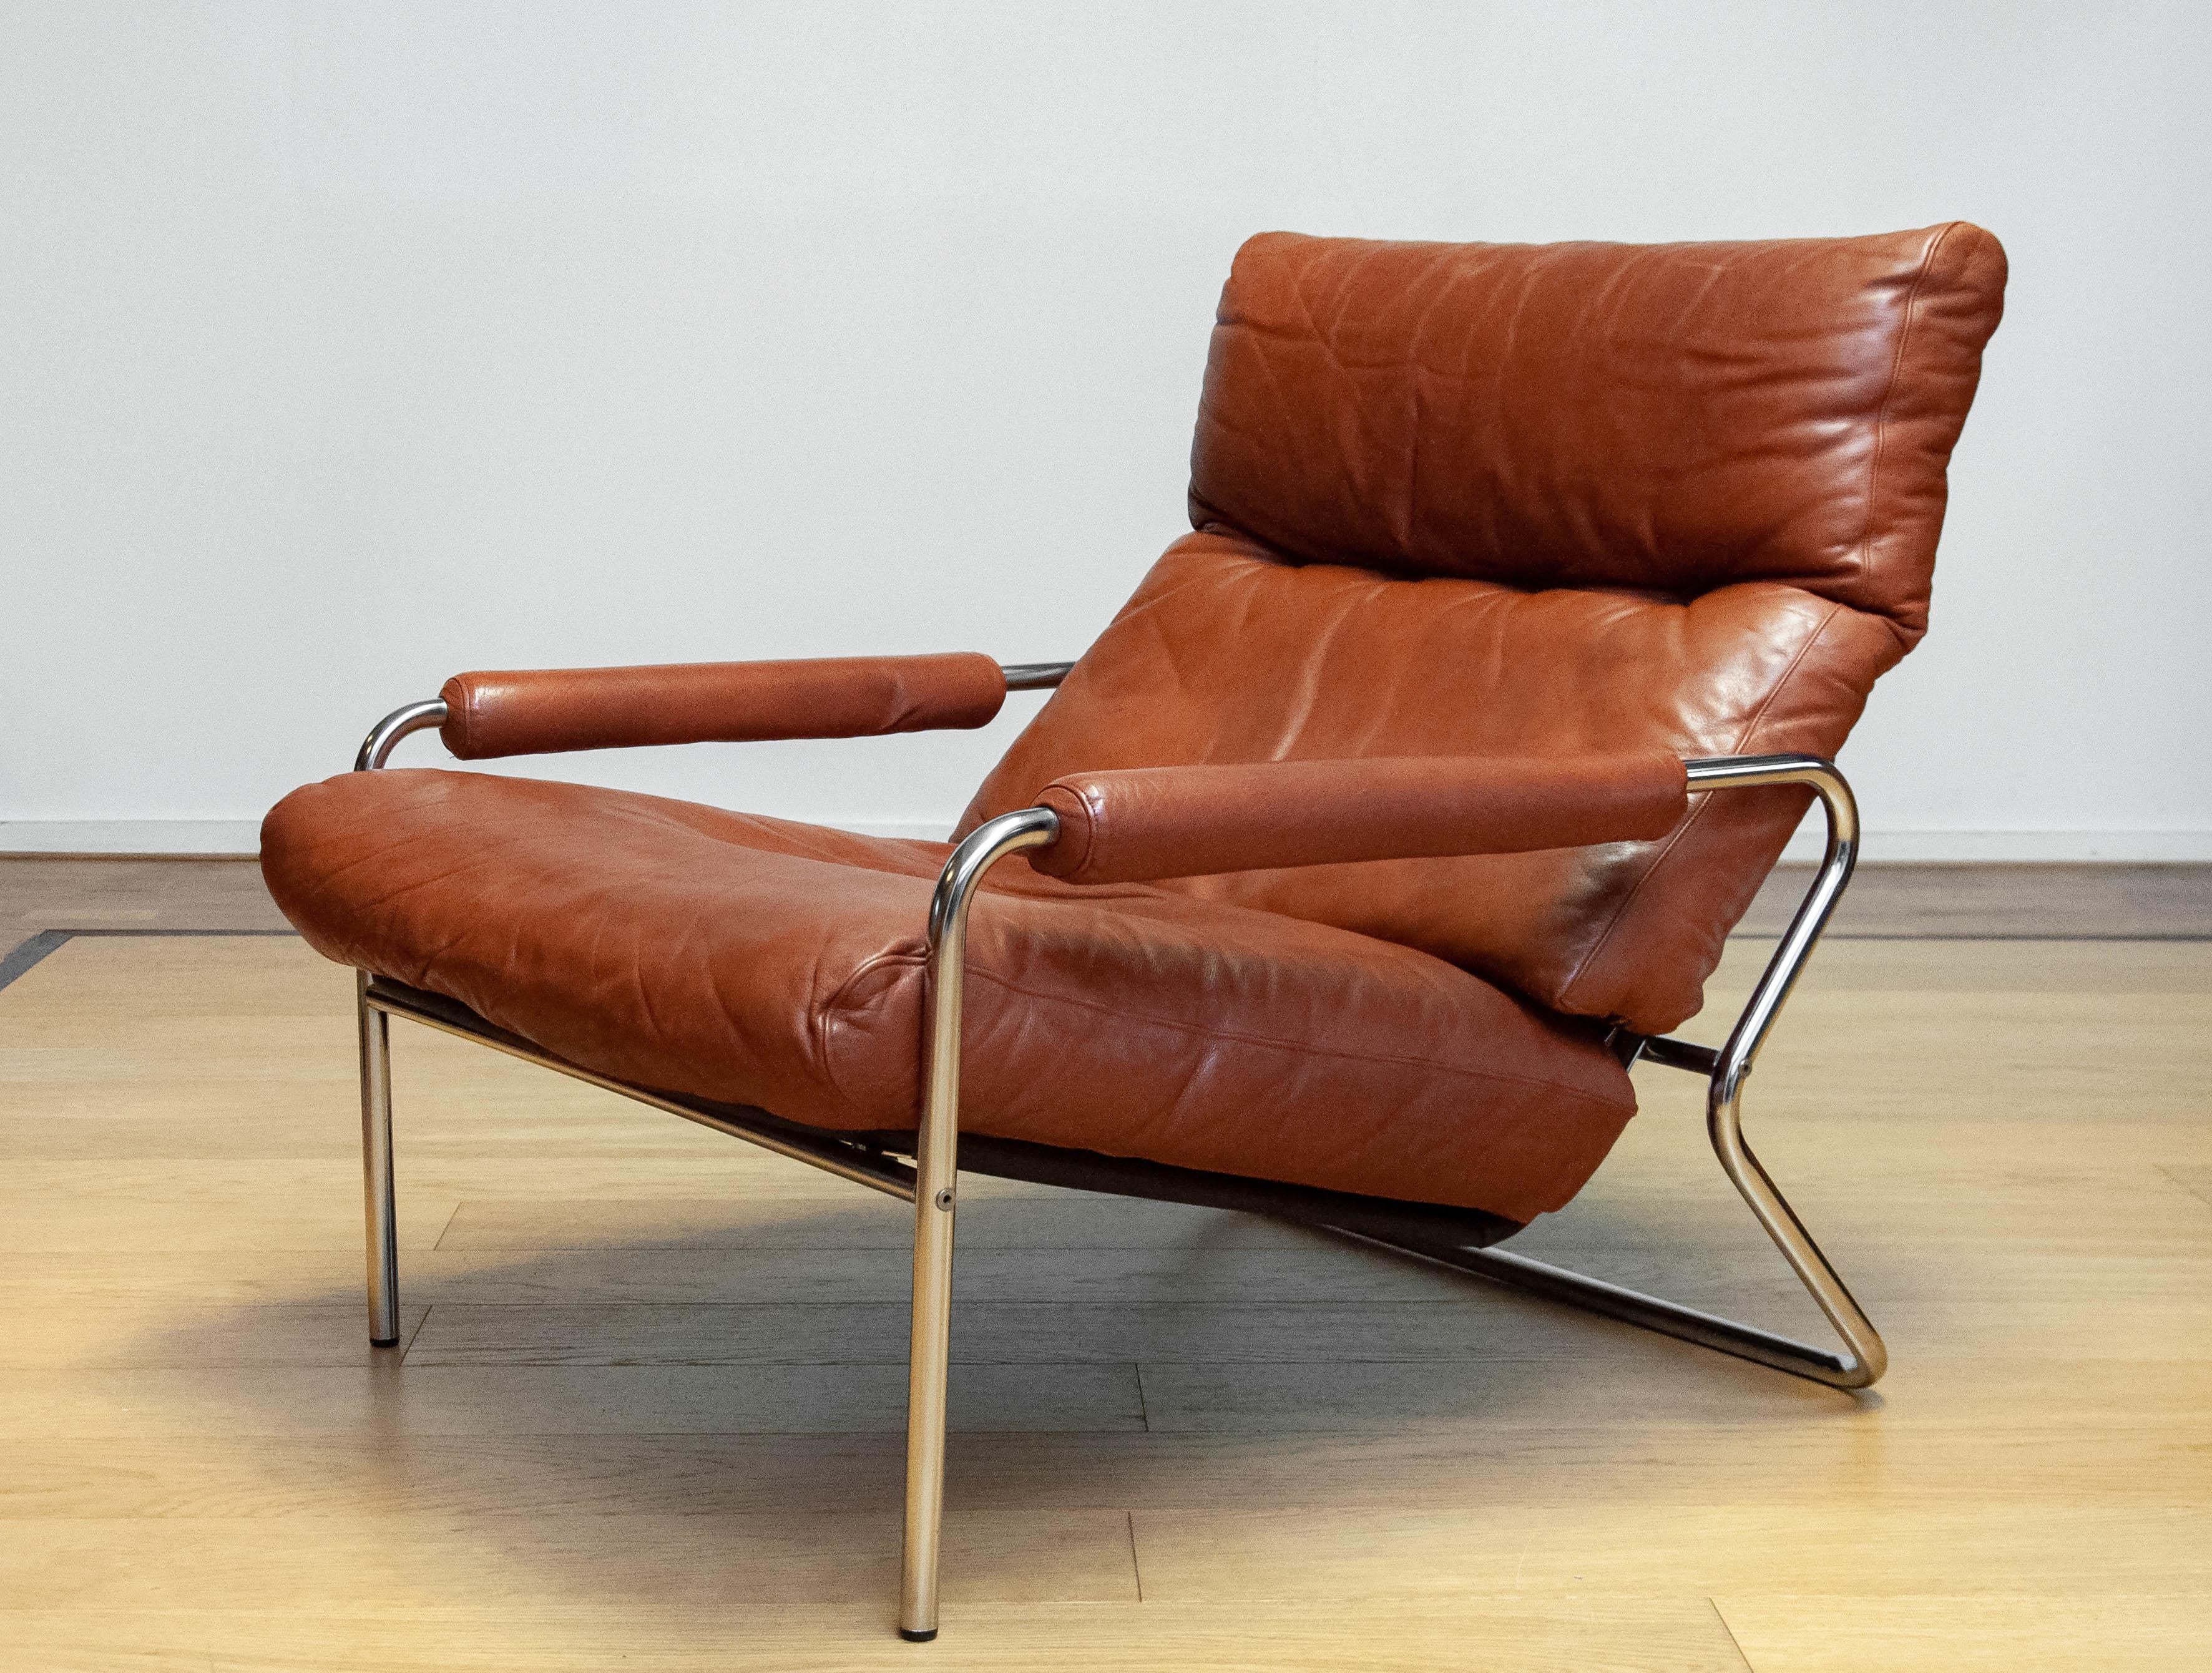 Beautiful Scandinavian Modern tubular lounge chair with brown leather cushions and brown leather armrests from the 1960s made in Sweden.
The leather is in good condition even as the fillings and therefor the chair sits very comfortable.
The metal